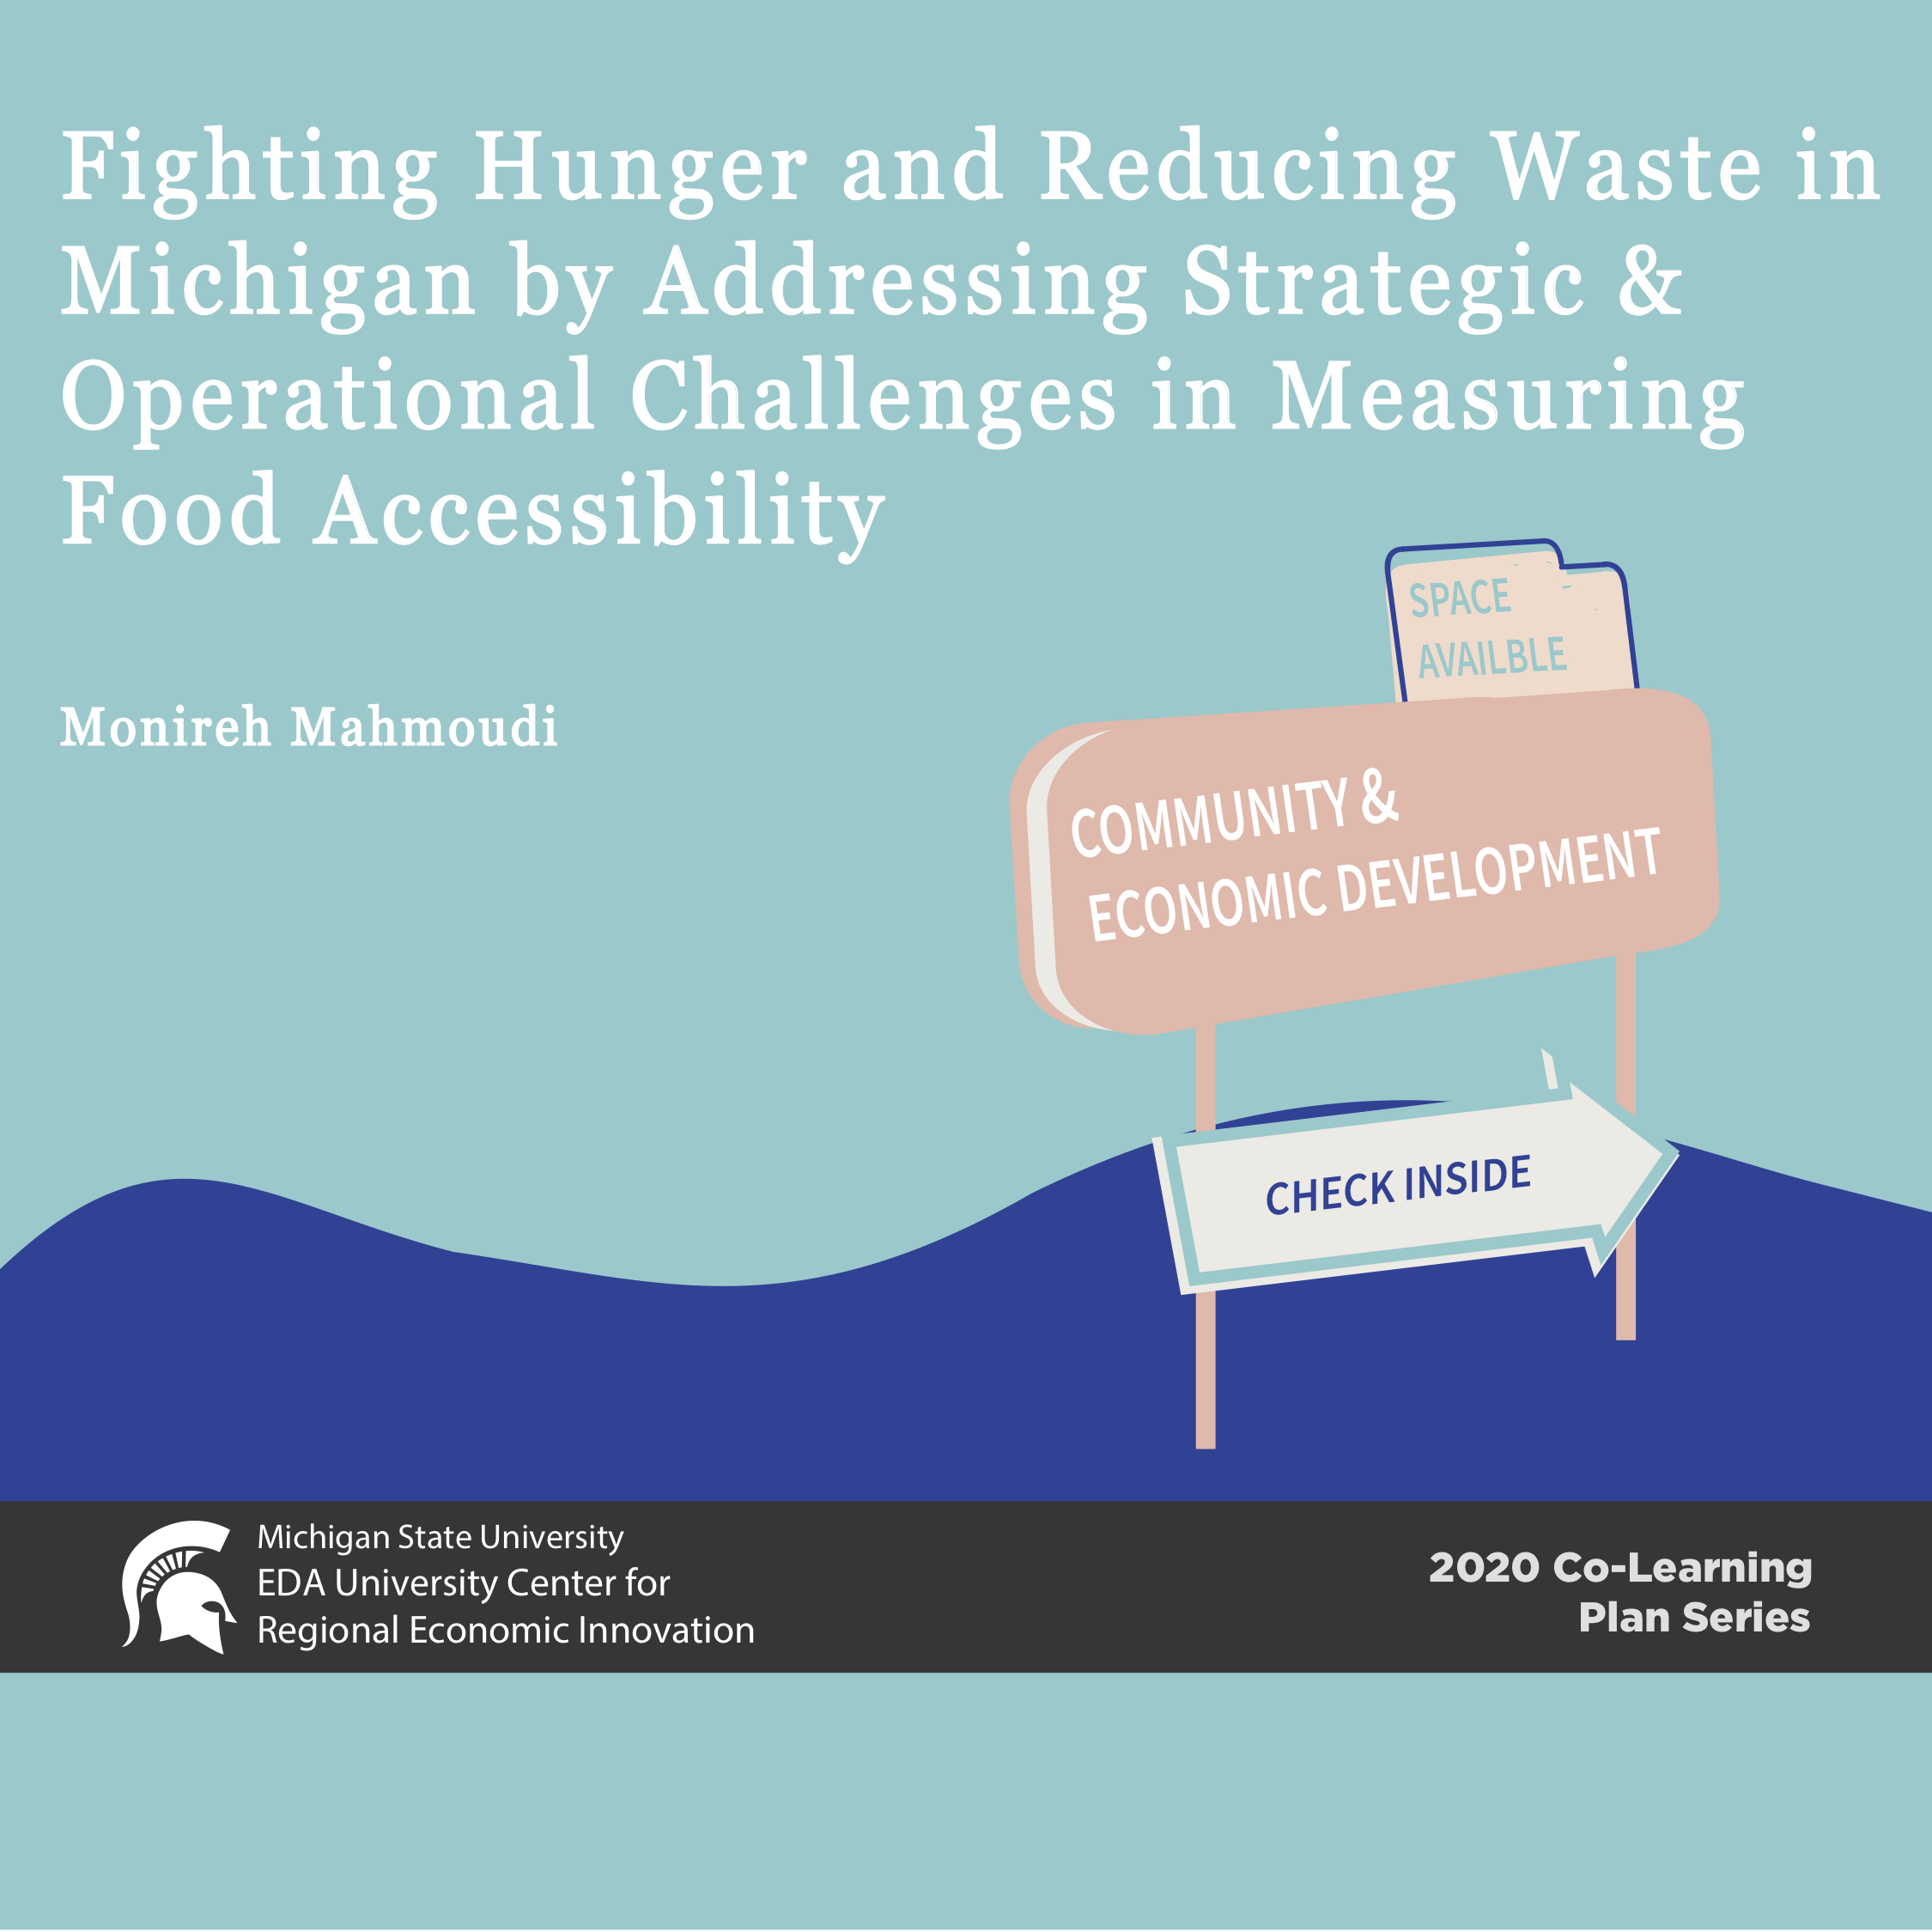 Fighting hunger and reducing waste in Michigan by addressing strategic and operational challenges in measuring food accessibility by Monireh Mahmoudi 2020 Co-Learning plan series. Michigan State University, EDA University center for regional economic innovation. Community and economic development, space available arrow pointing to check inside.